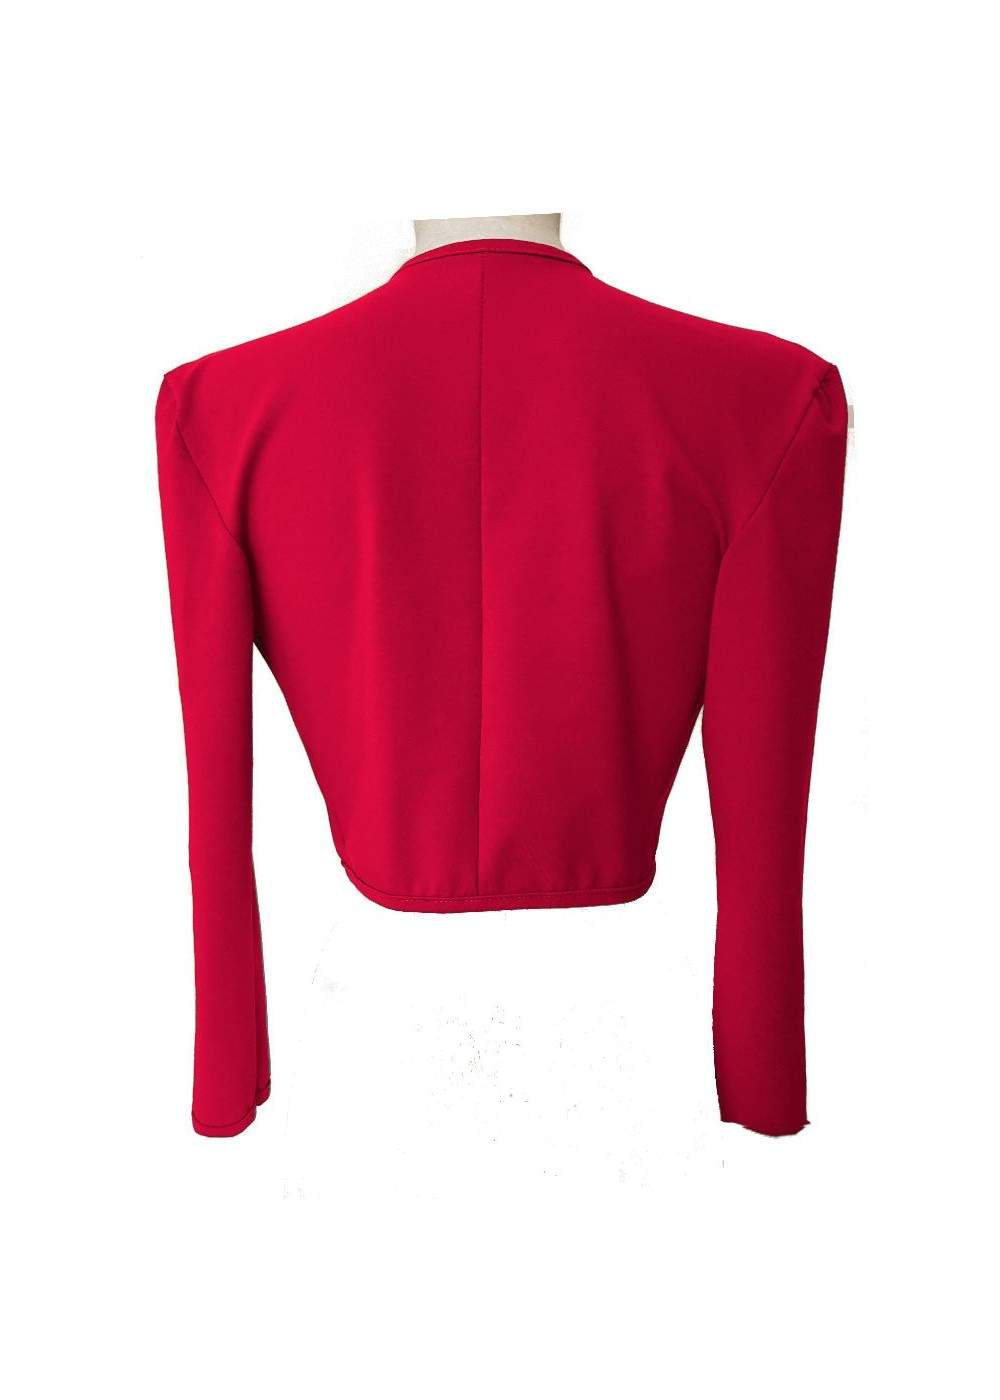 Sizes 34 - 52 Red Cotton Stretch Short Jacket from Magdeburg Produc... - 